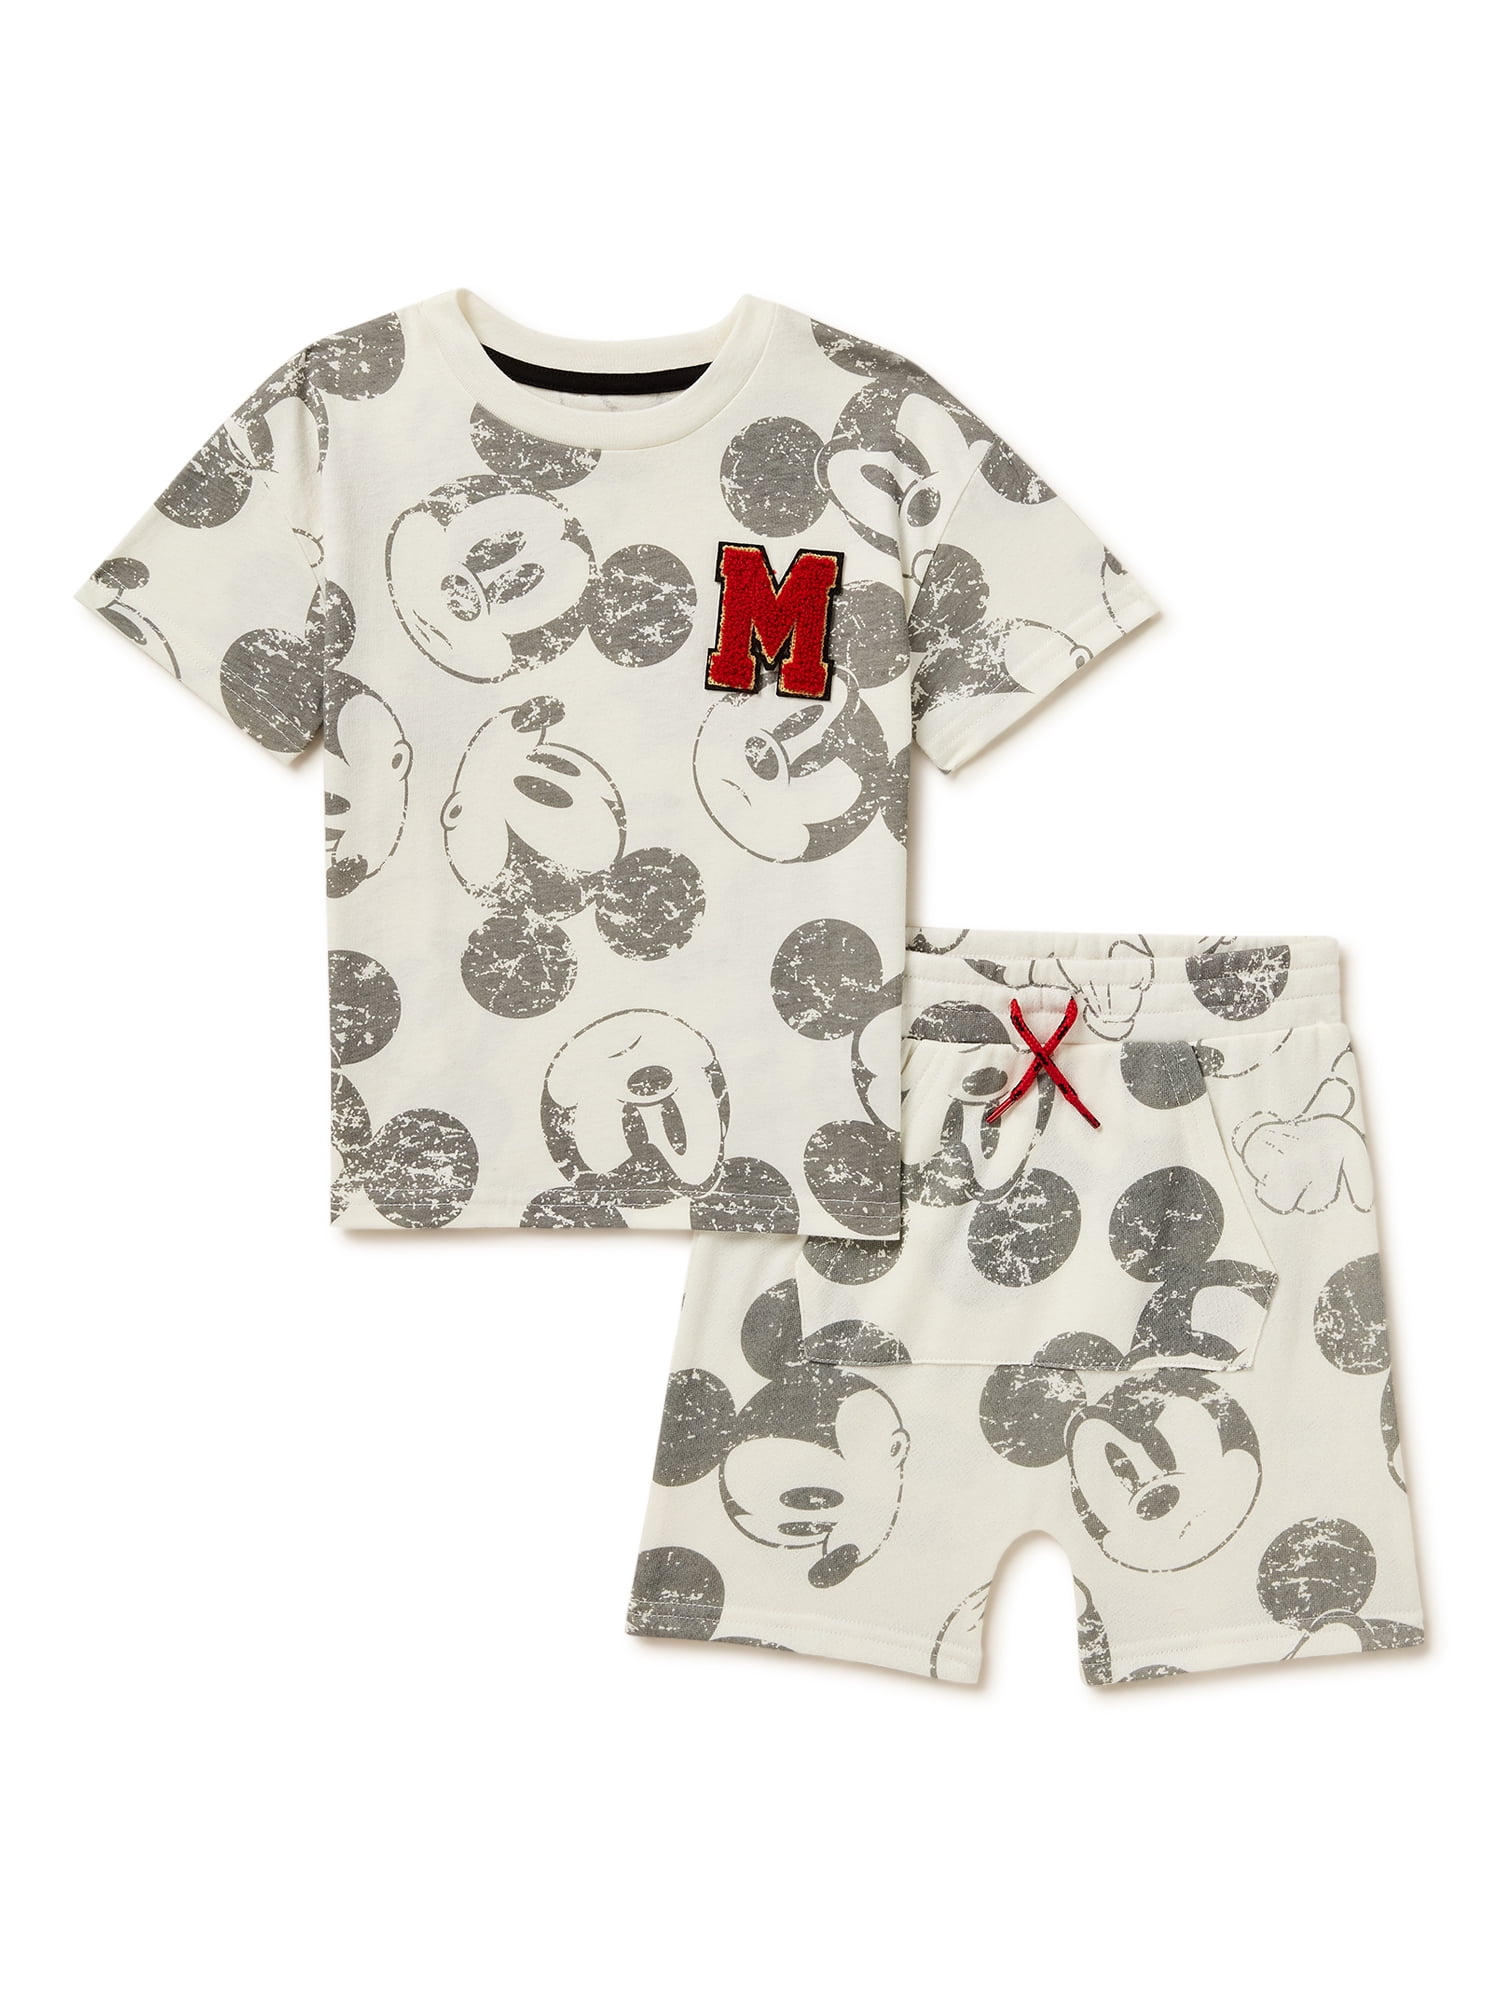 Disney Mickey Mouse Toddler Boys T-Shirt and Shorts, 2-Piece Set, Sizes 12 Months-5T